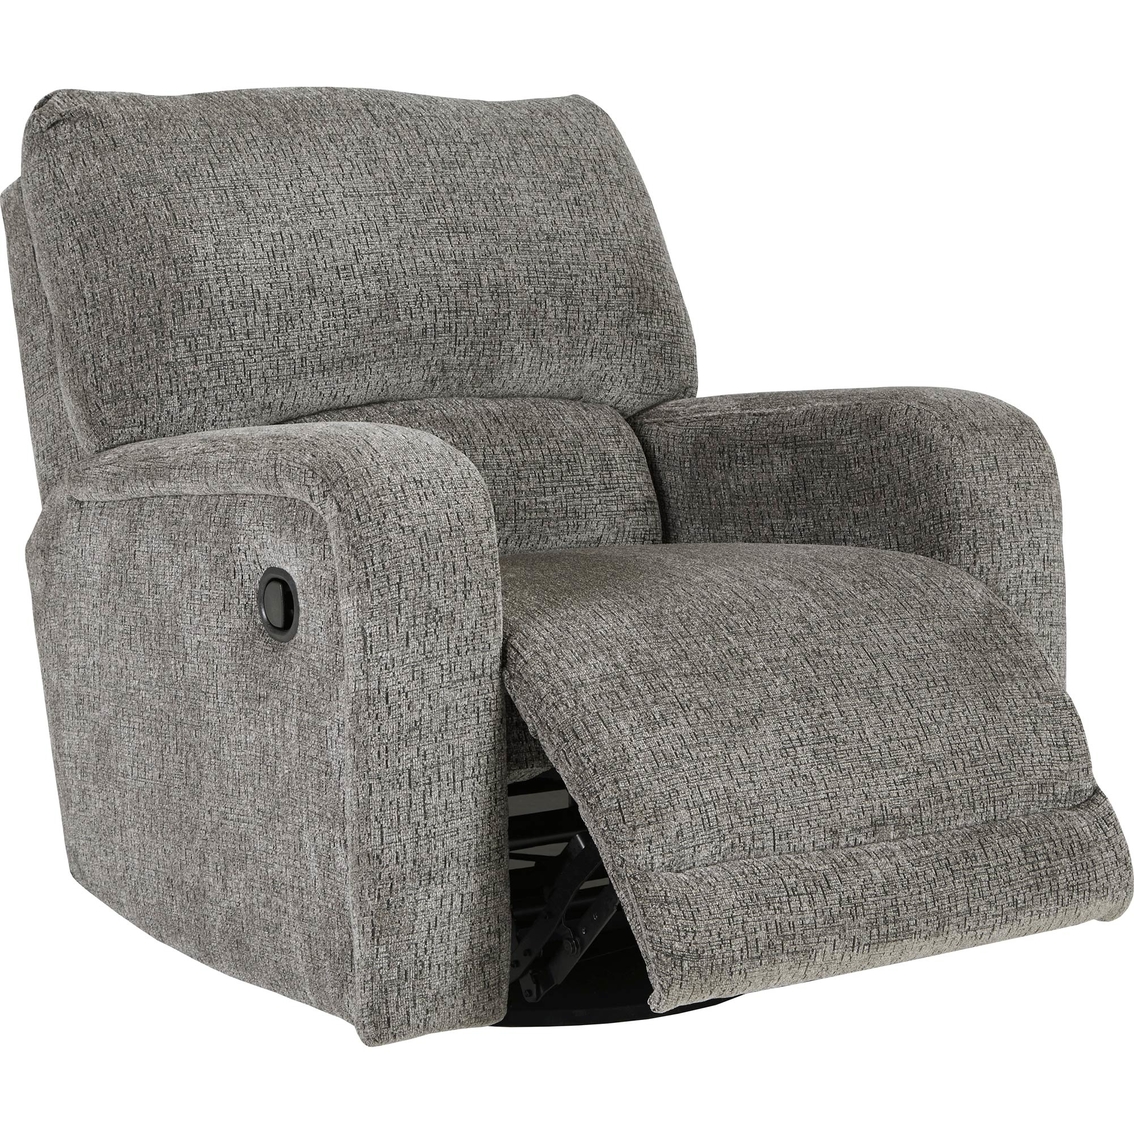 Signature Design by Ashley Wittlich Swivel Glider Recliner - Image 3 of 3